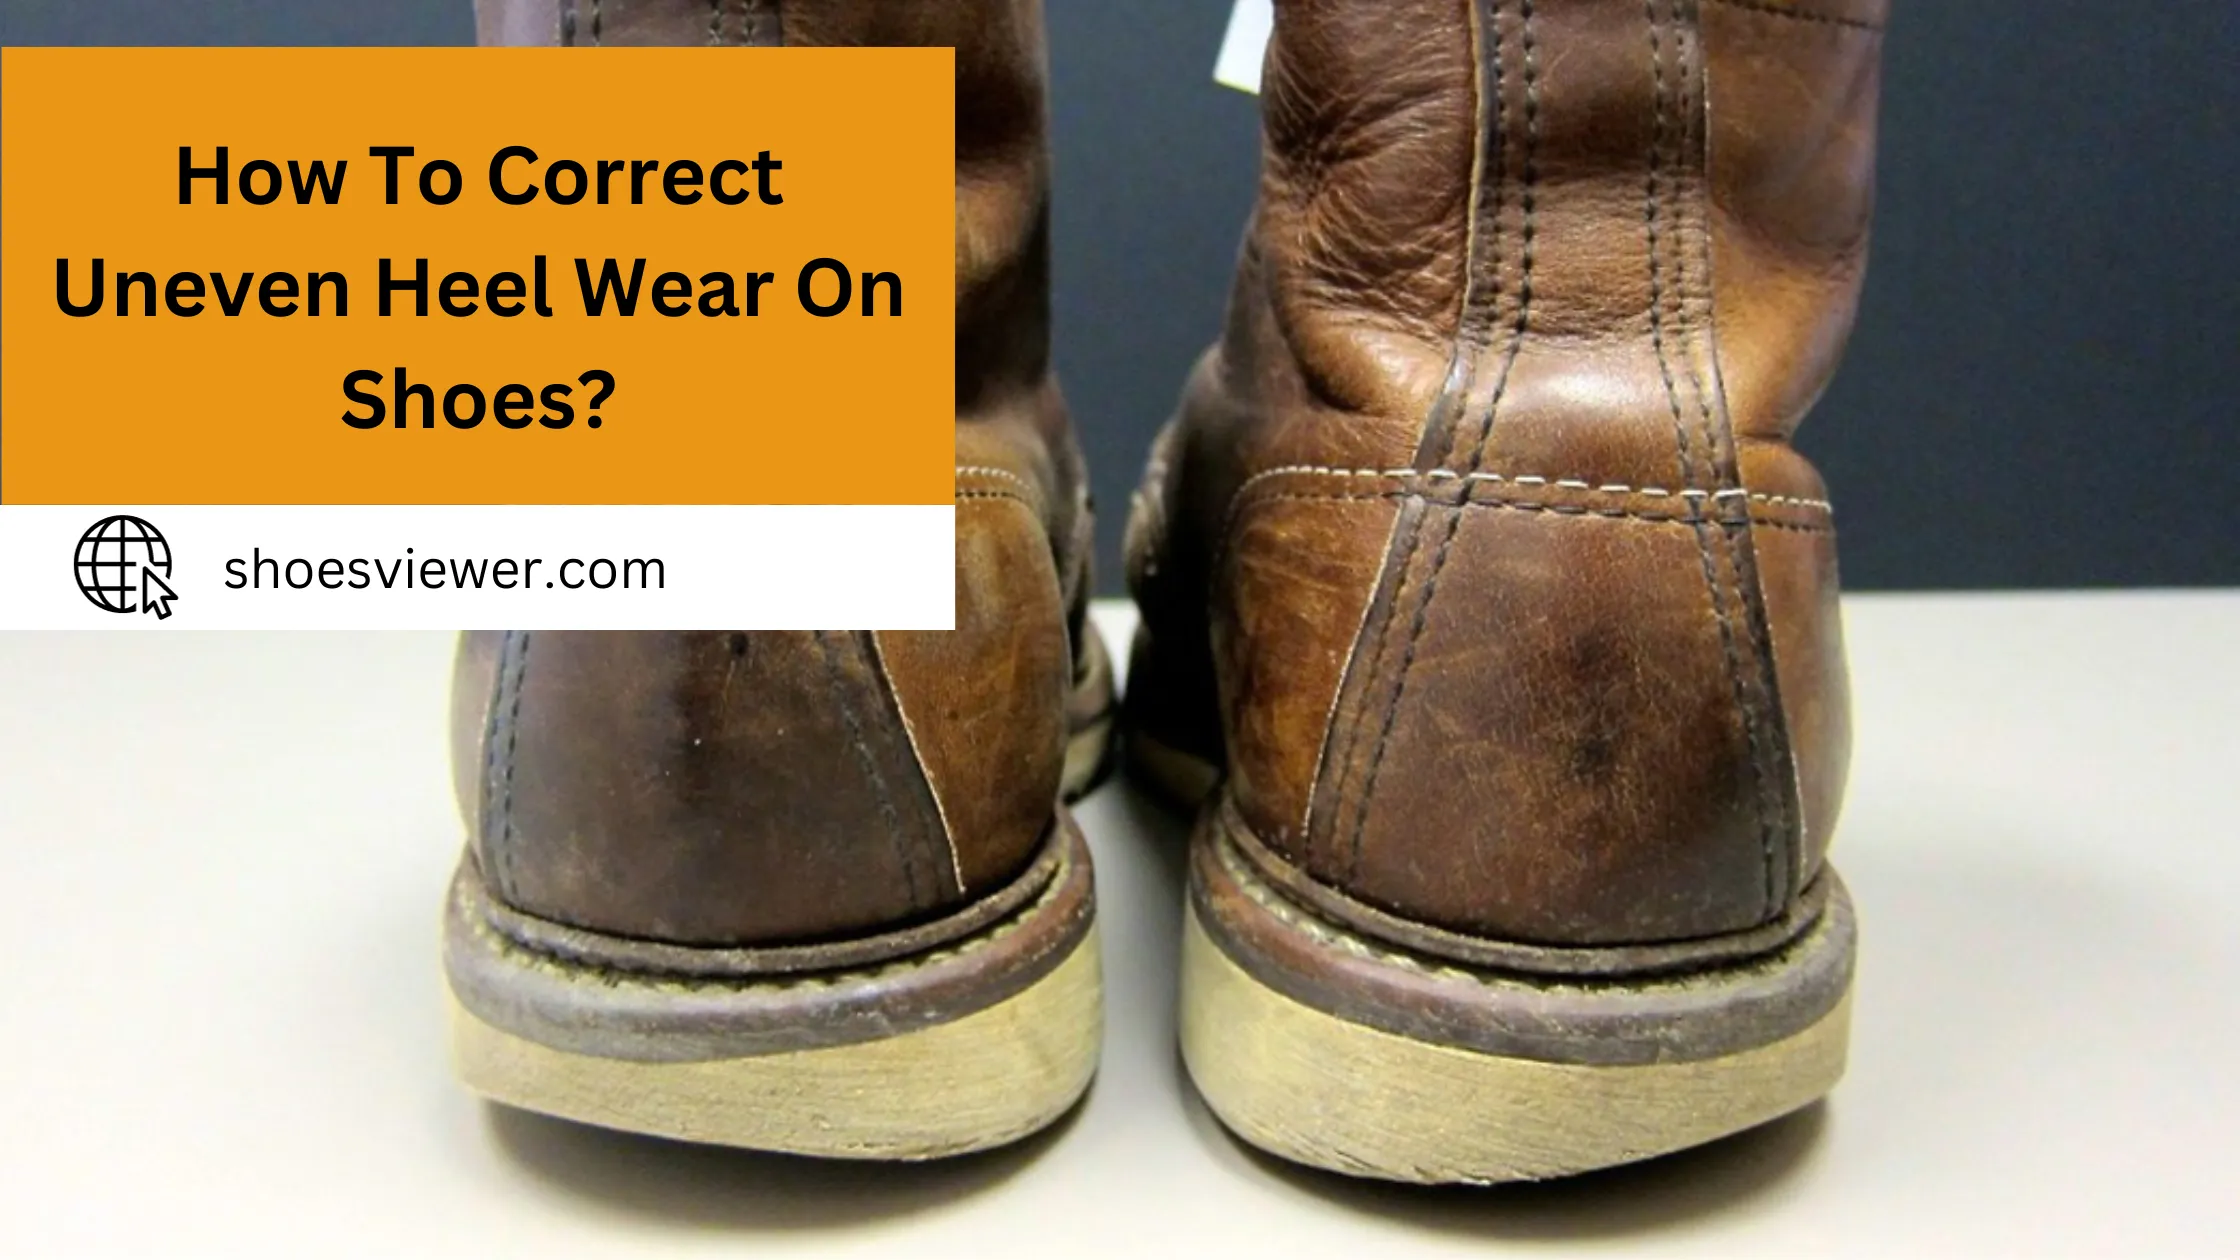 How To Correct Uneven Heel Wear On Shoes? Pro Tips